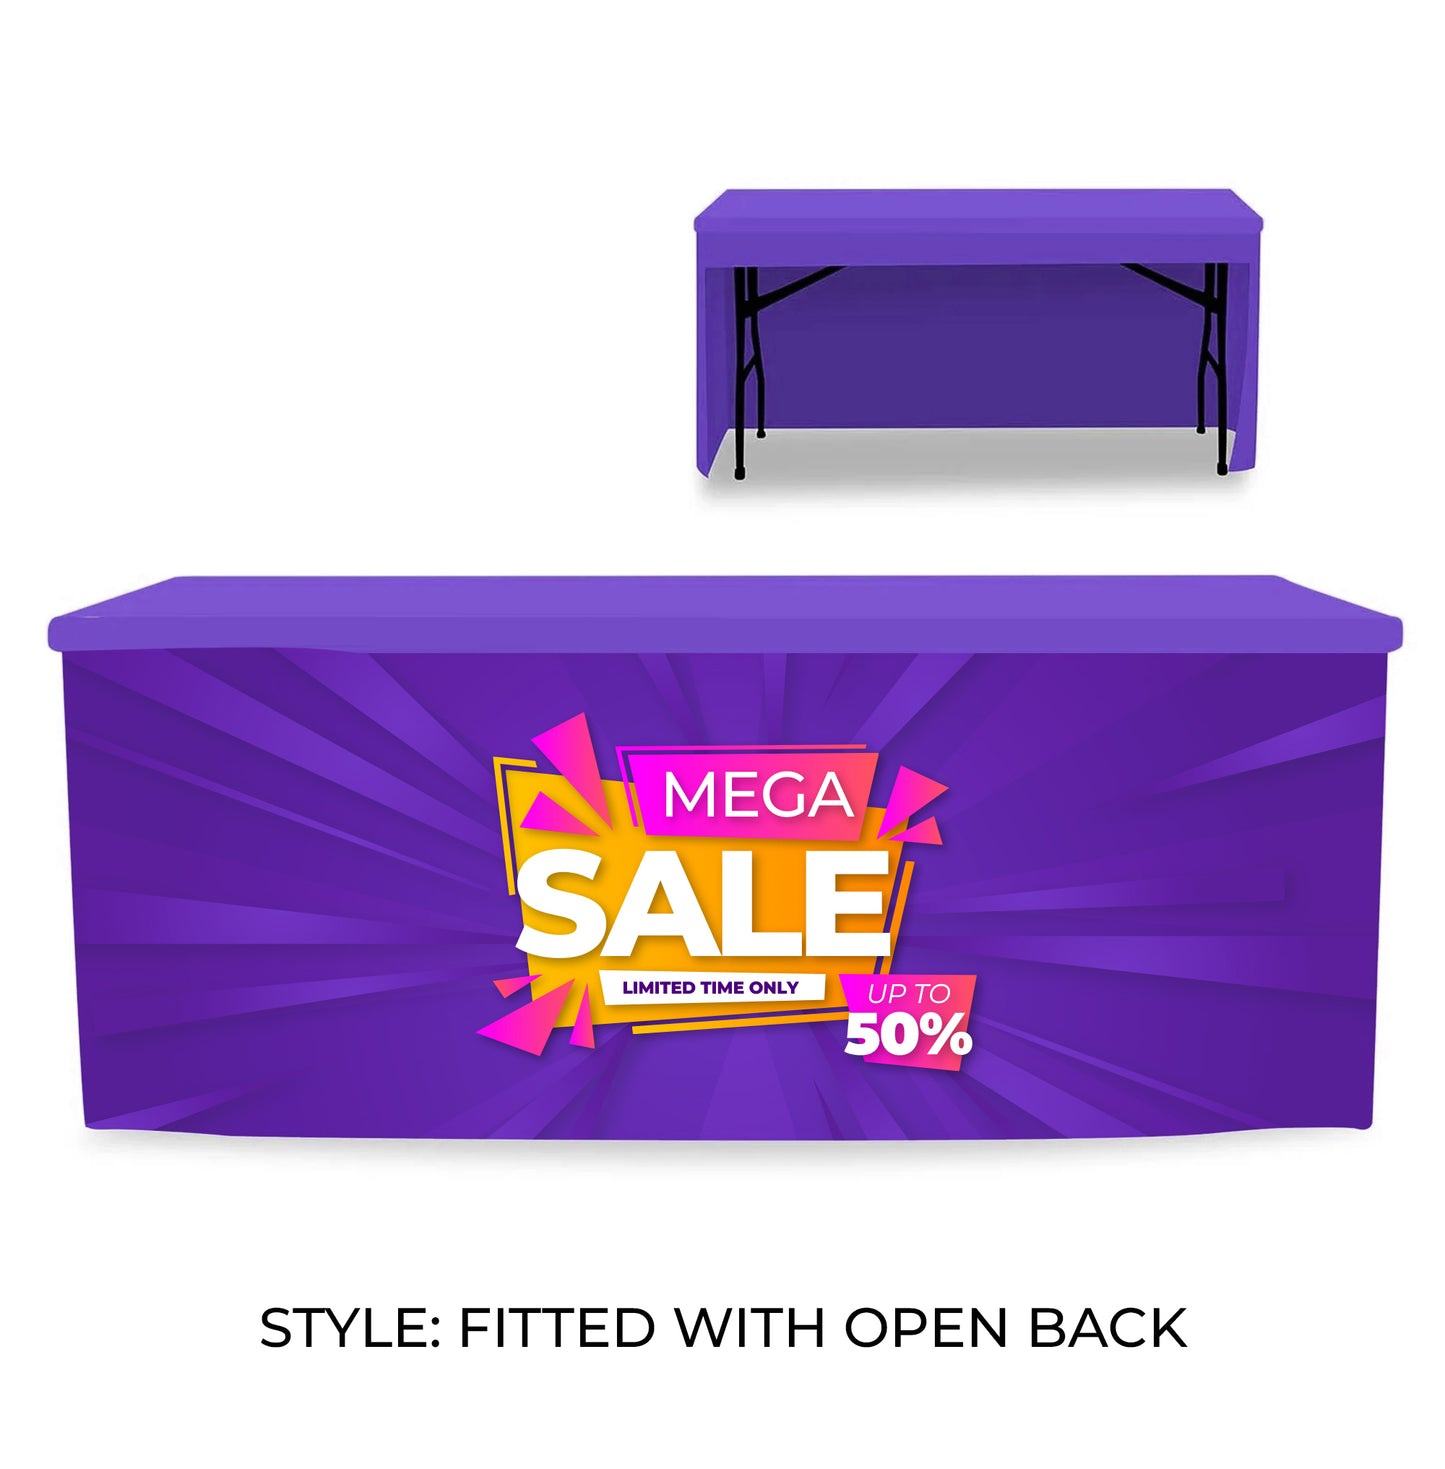 8' TABLE COVER